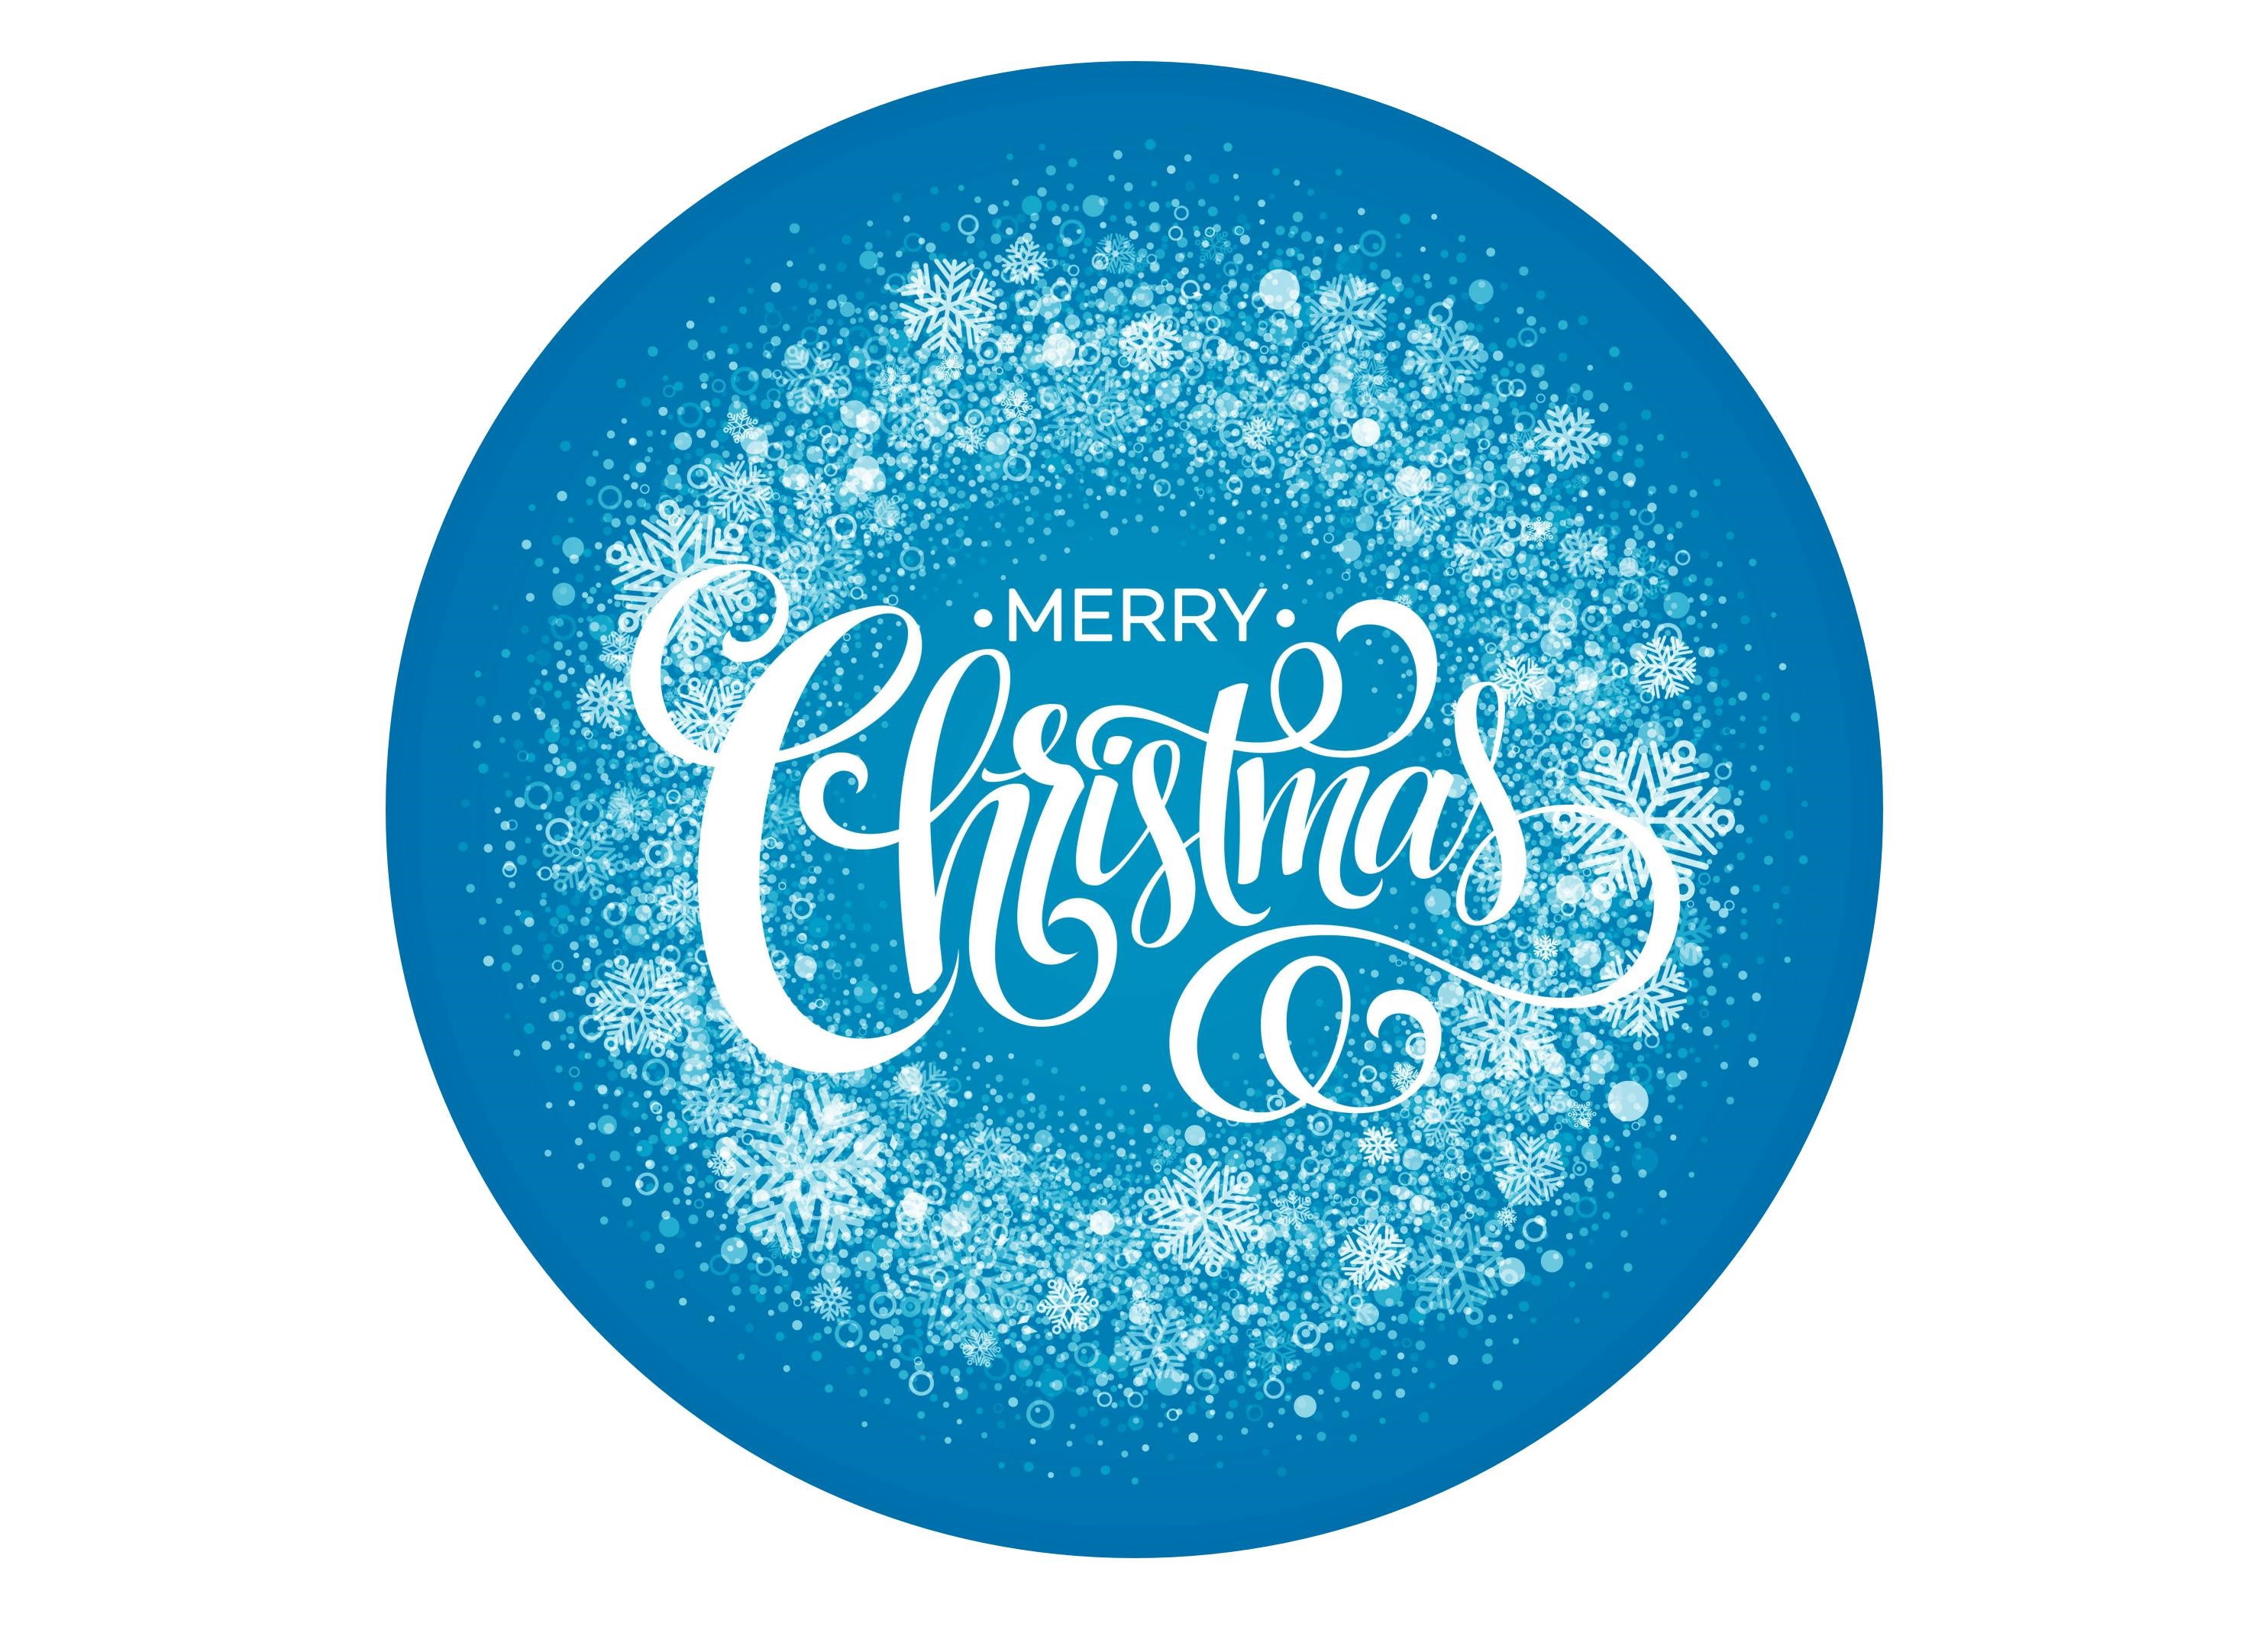 Large round cake topper with Merry Christmas message on a blue snowflake background